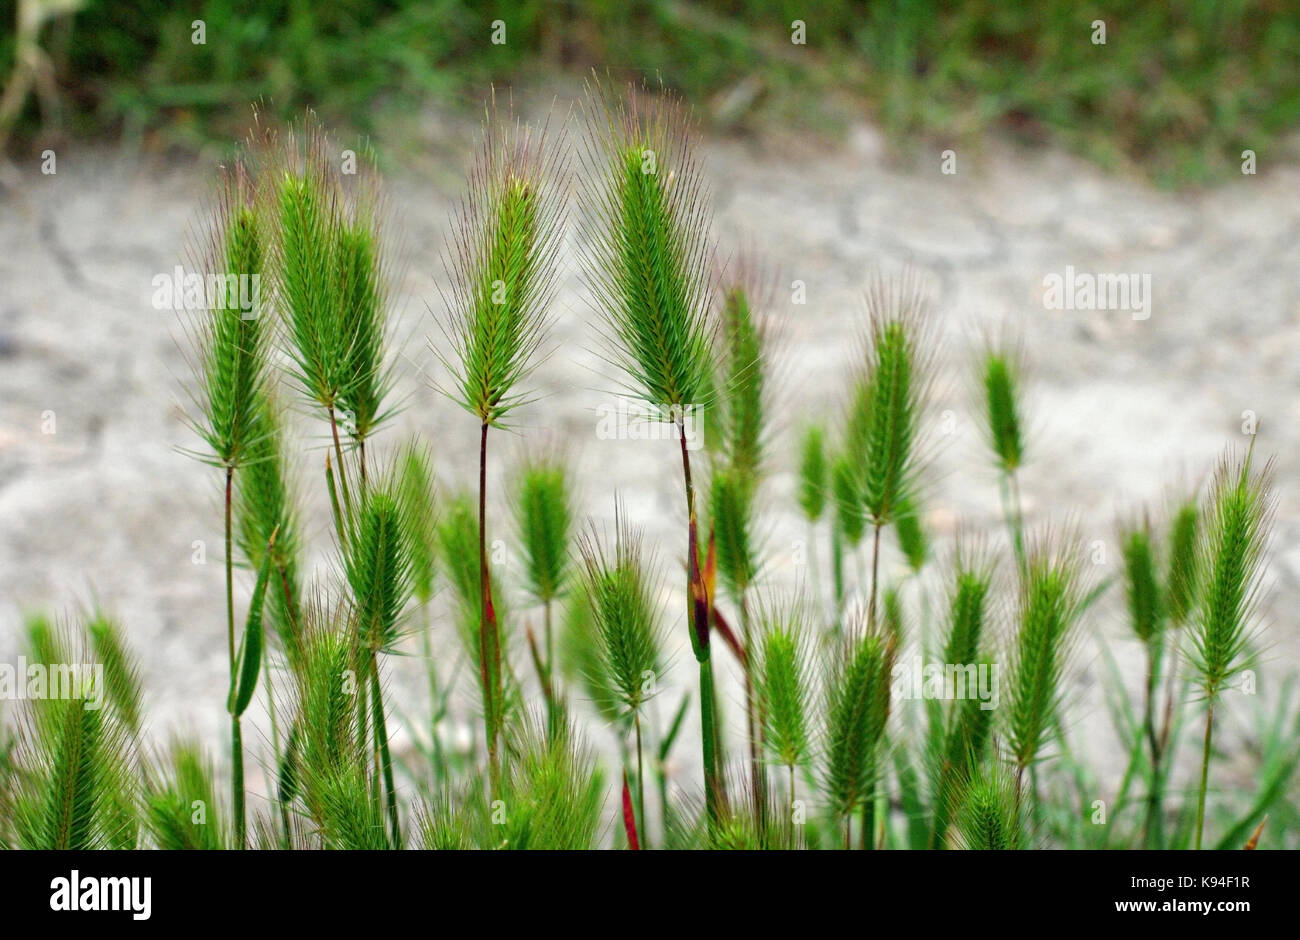 the wild grass Hordeum marinum, the Sea barley or Seaside barley, from the family Poaceae Stock Photo